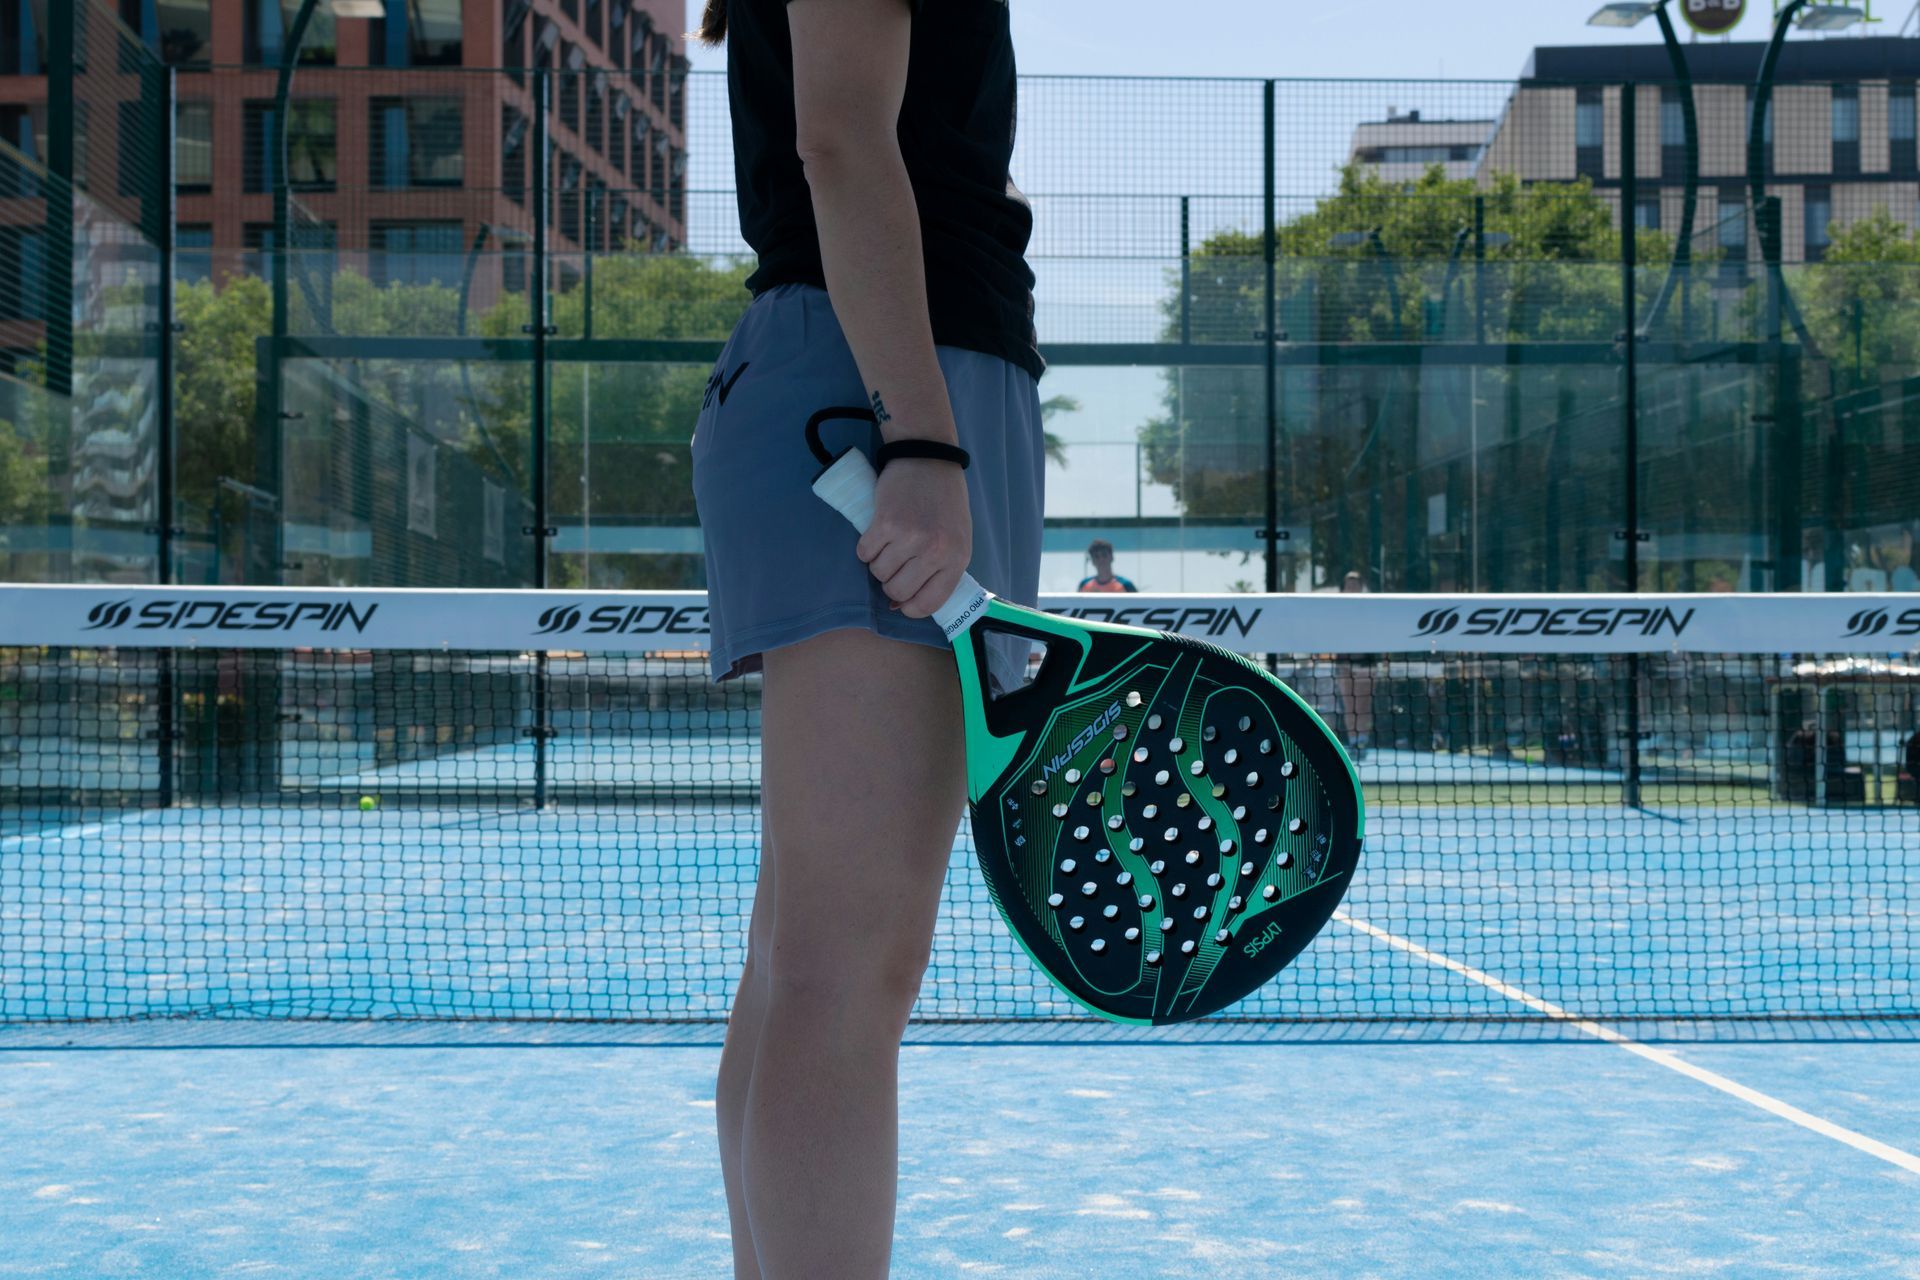 A woman is holding a paddle on a tennis court.